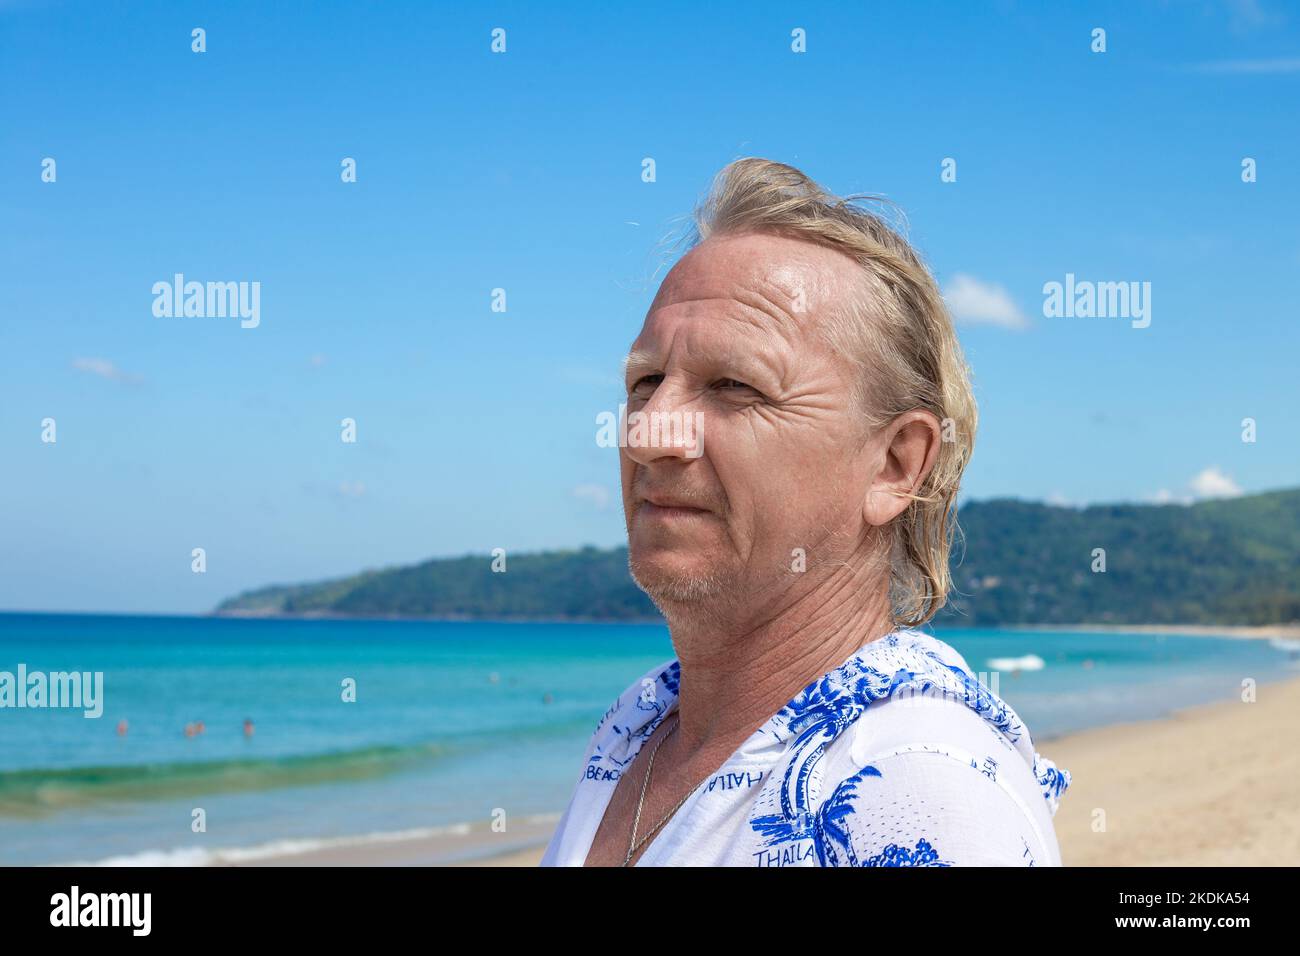 A fair haired adult male tourist looks into the distance on the seashore on a sunny day. Travel and tourism. Stock Photo